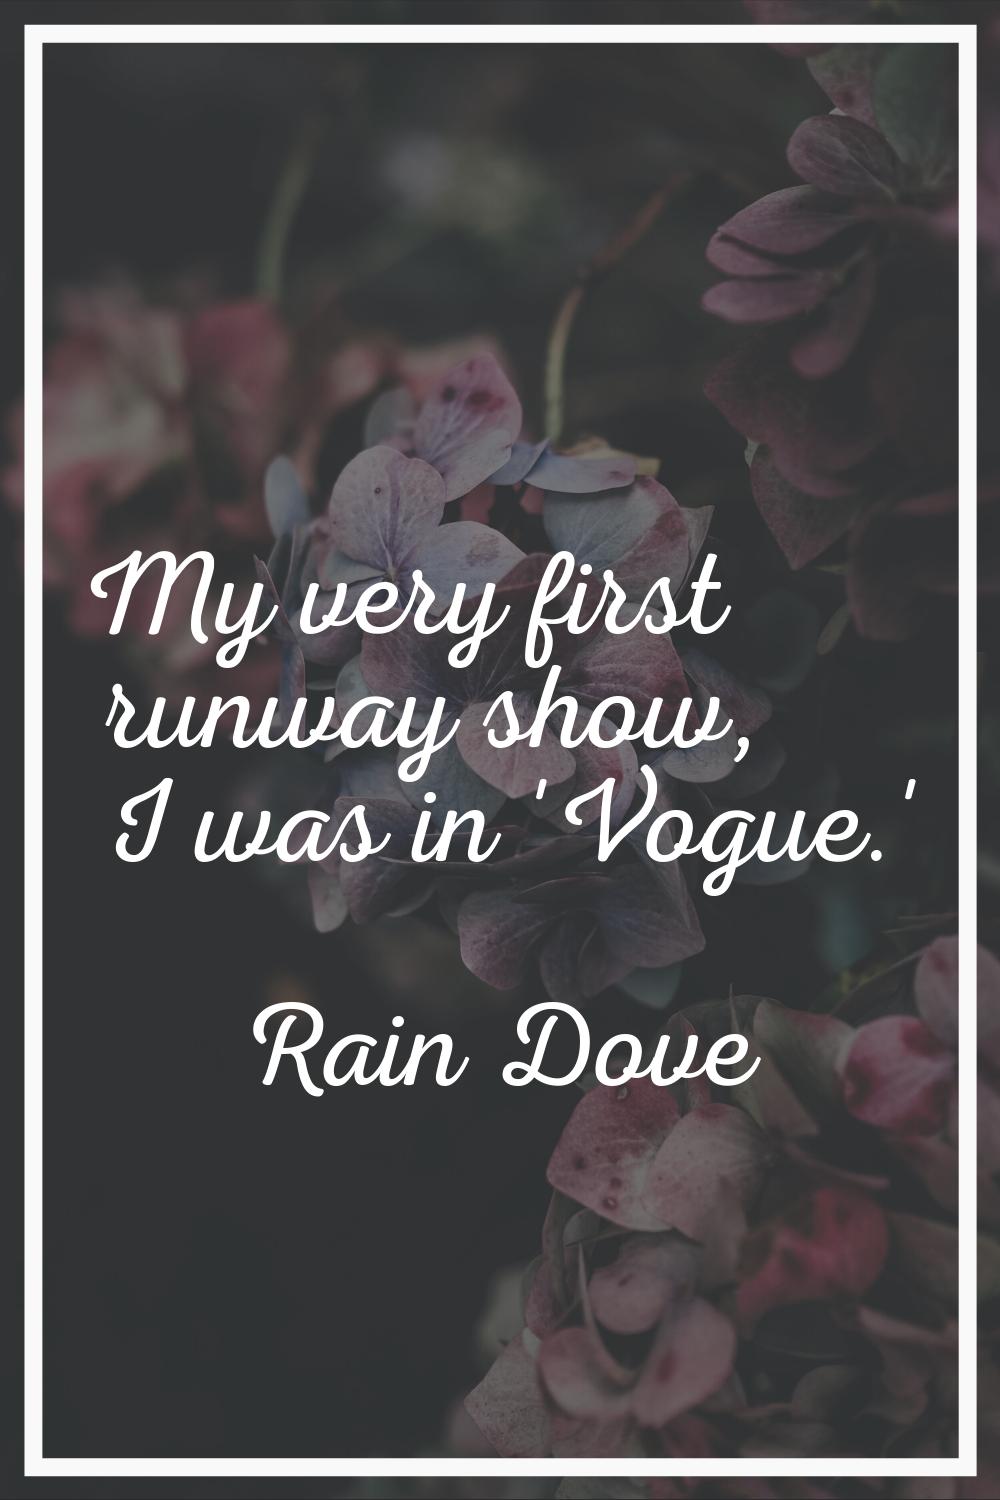 My very first runway show, I was in 'Vogue.'